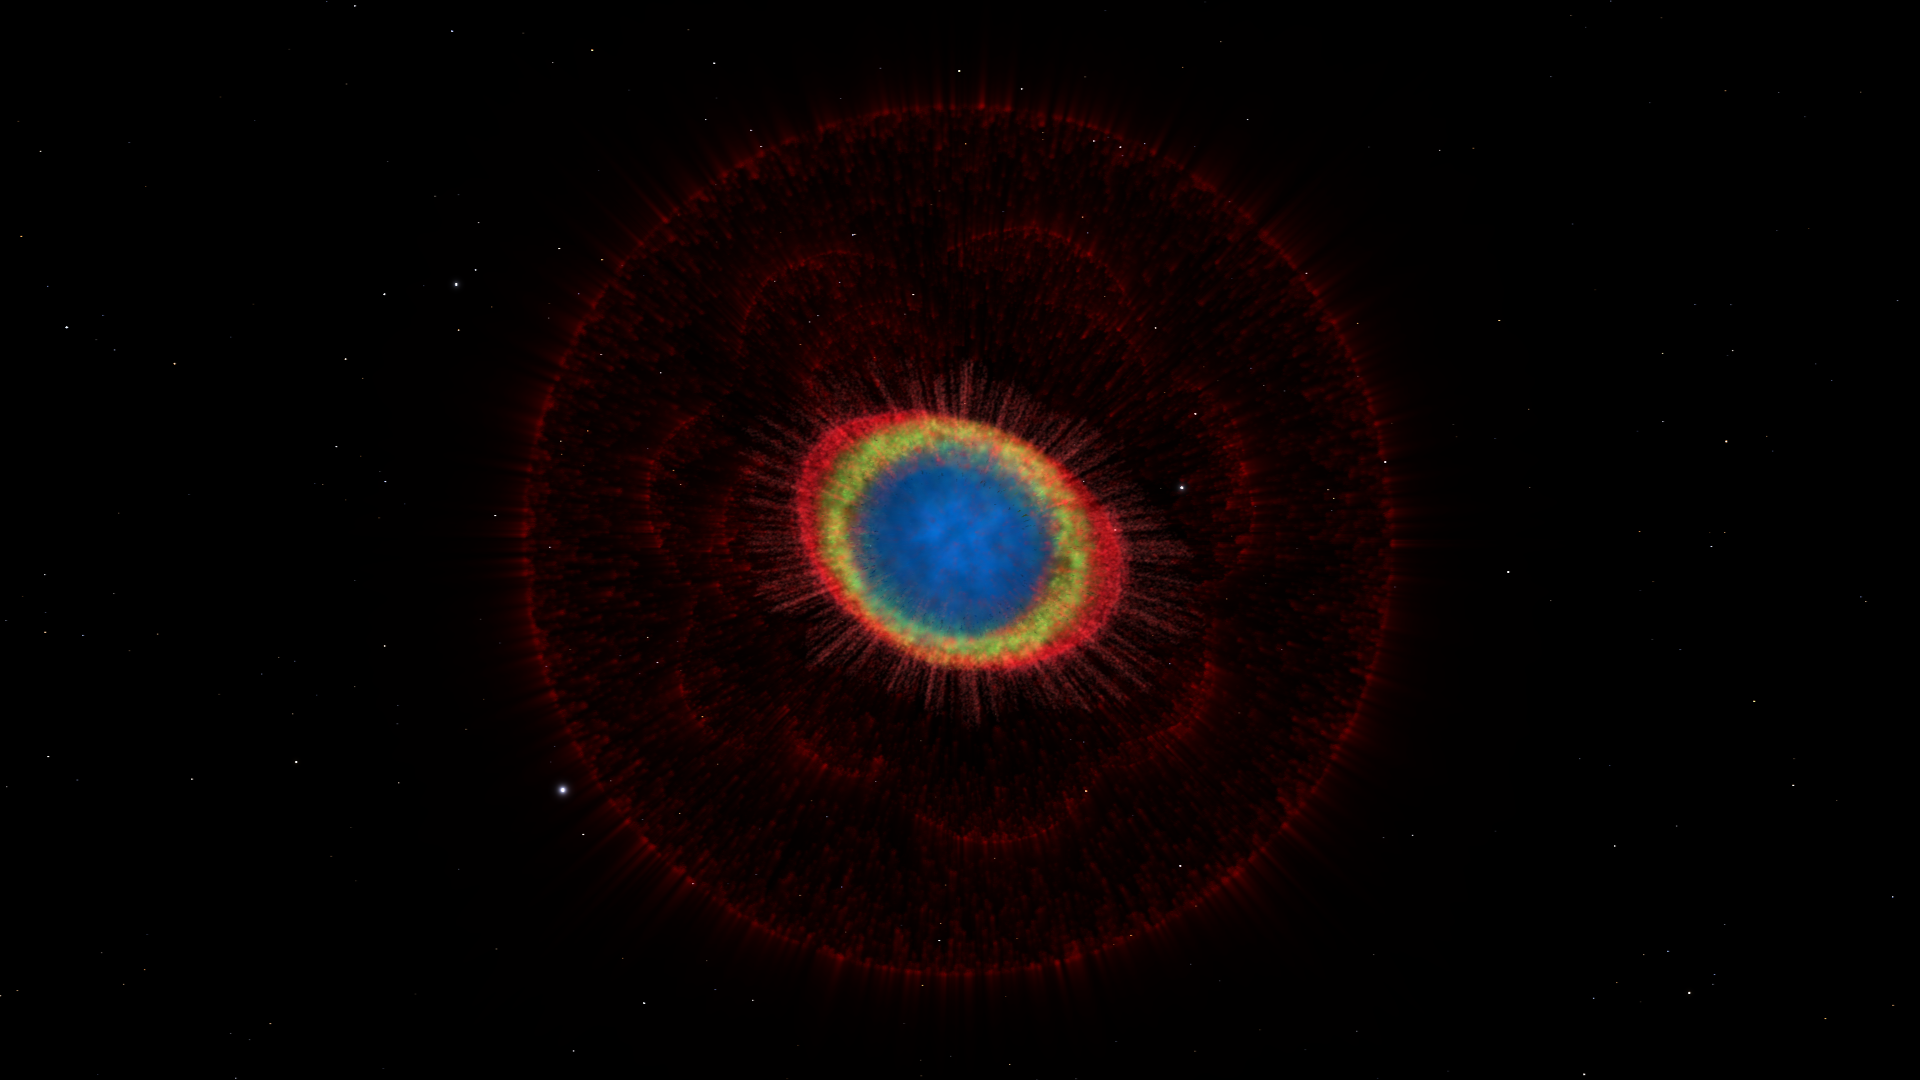 A visualization of the 3D structure of the Ring Nebula based on visible light observations from the Hubble Space Telescope and infrared observations from the Large Binocular Telescope.